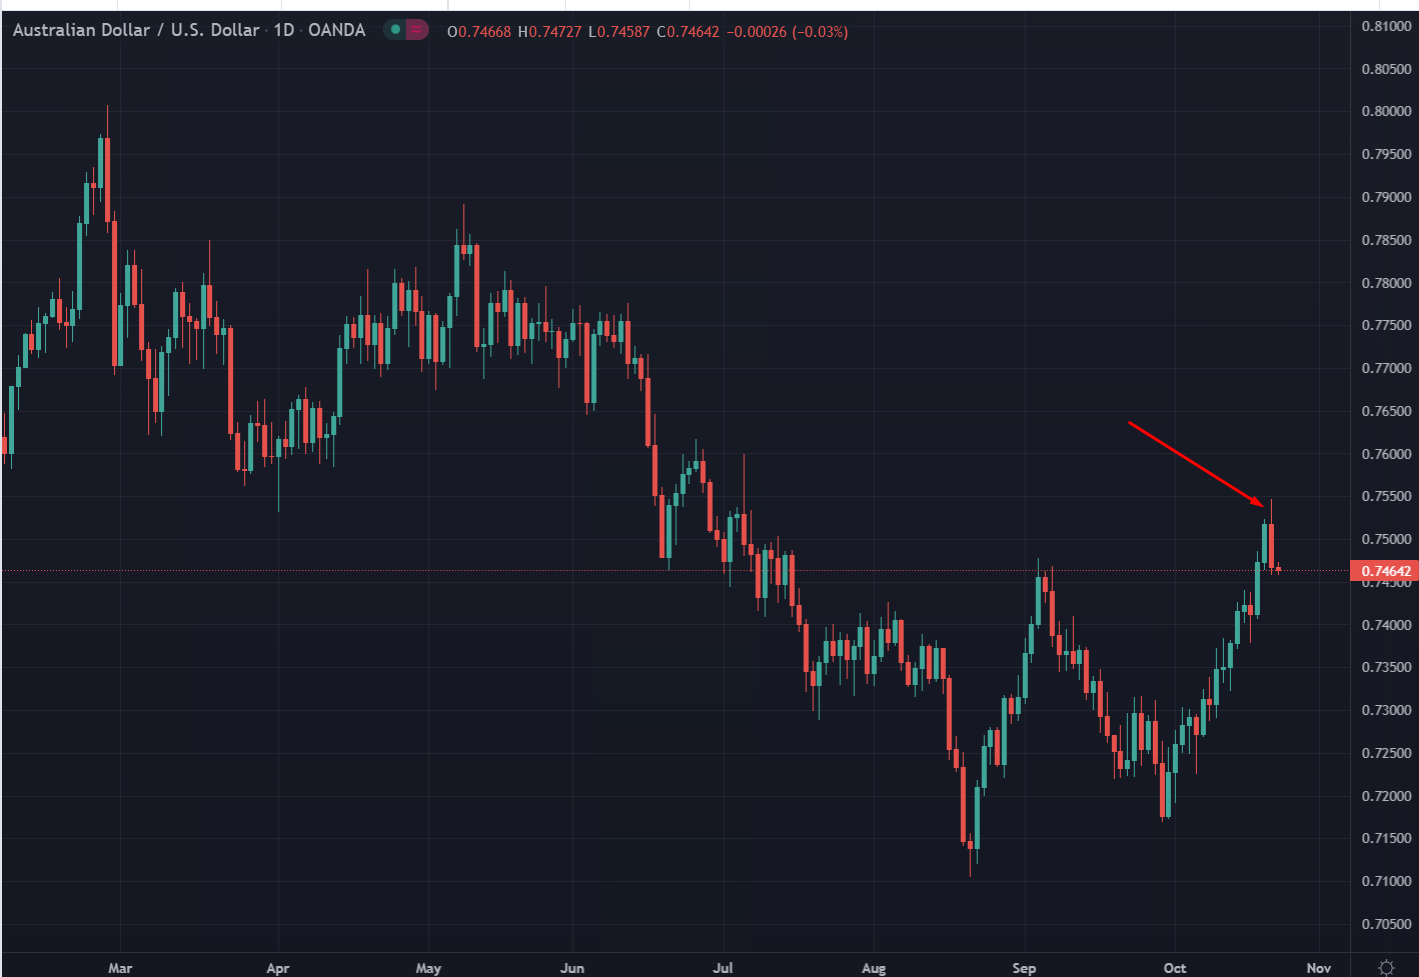 Throwing this open to the charting people and any remarks they may have on what appears to me to be a clear outside reversal day for AUD/USD: